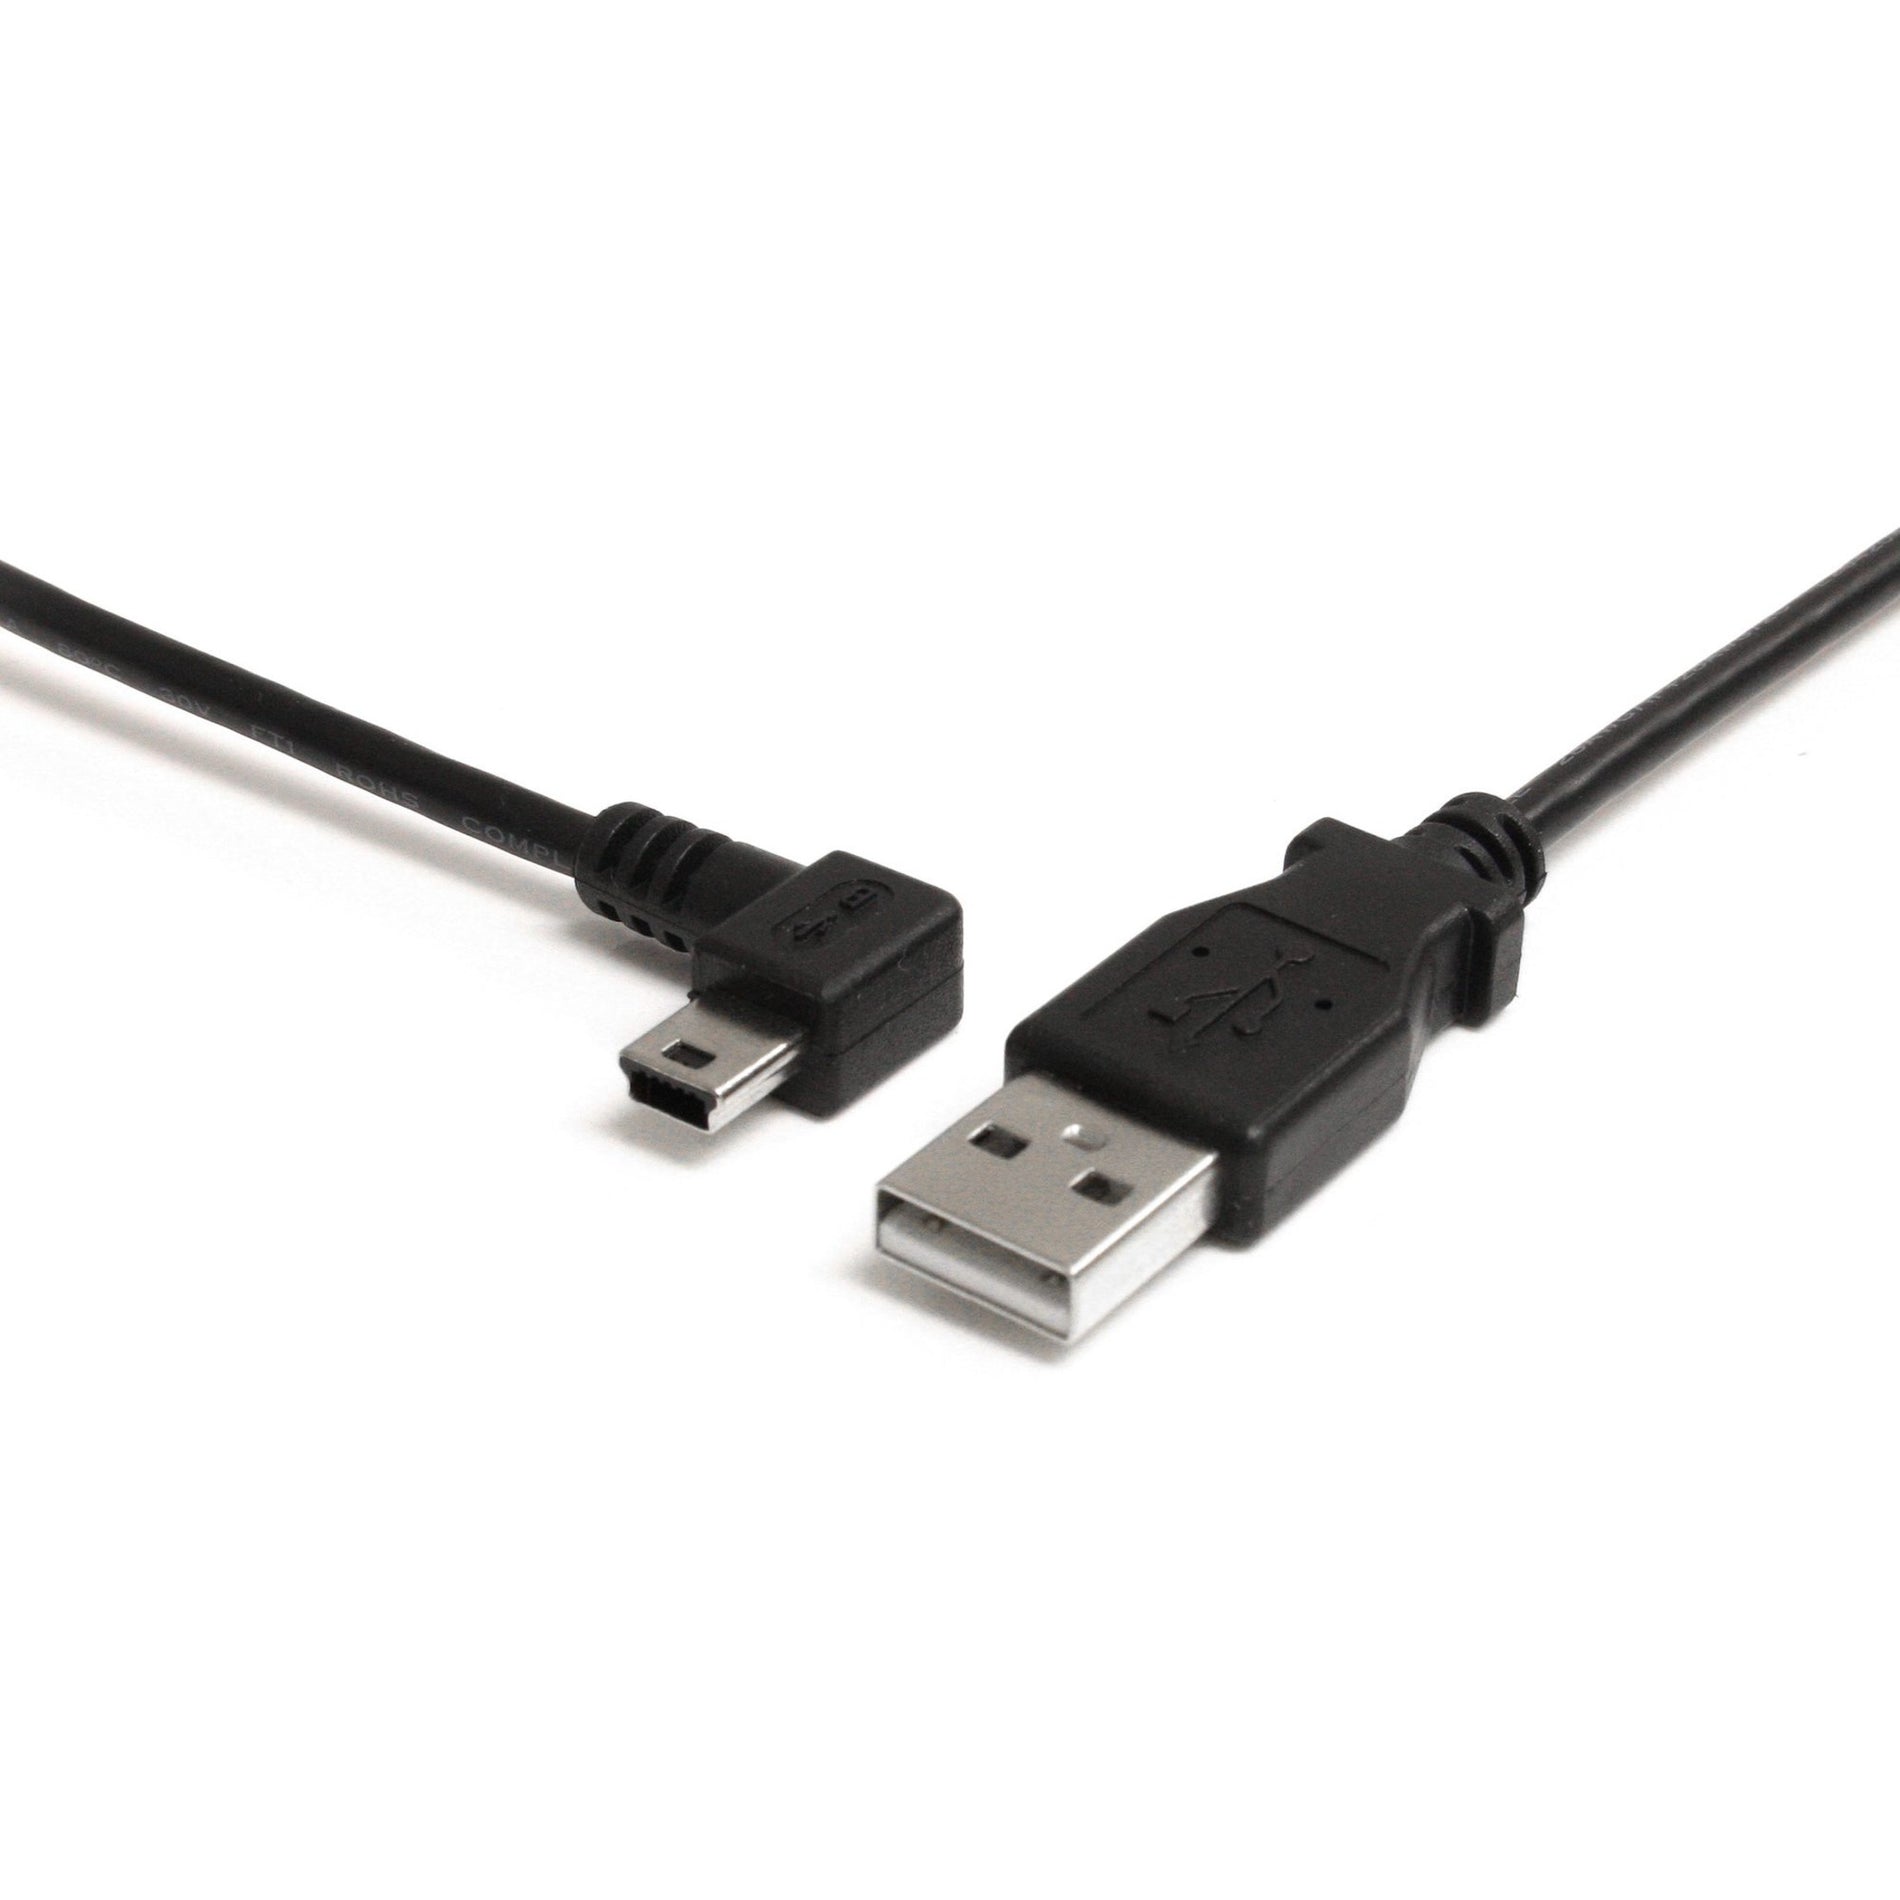 StarTech.com USB2HABM6LA 6 ft Mini USB Cable - A to Left Angle Mini B, Data Transfer Cable with Strain Relief, Molded Connector, 480 Mbit/s Data Transfer Rate